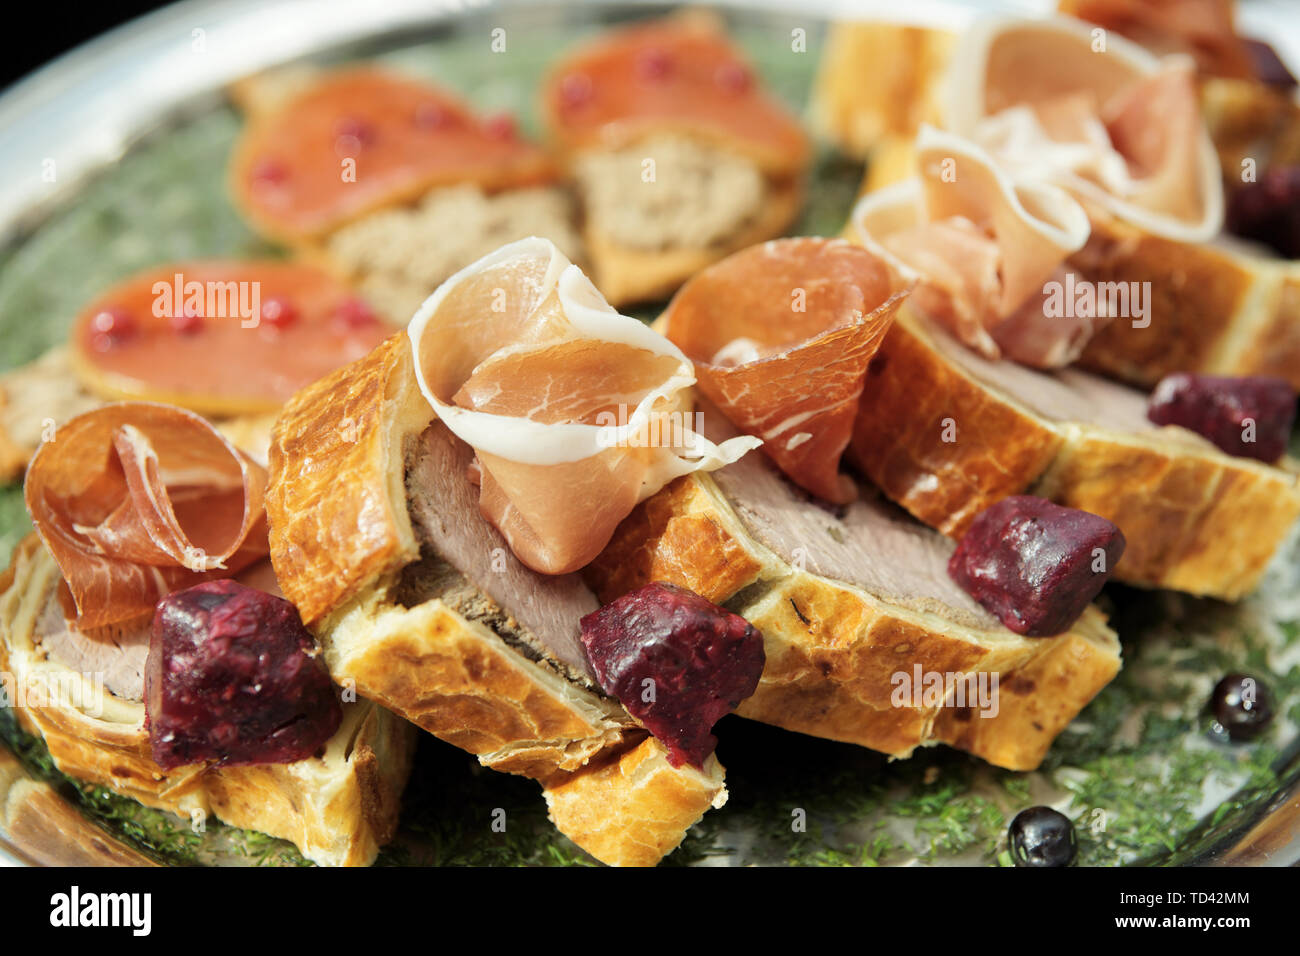 Meat roll with cured ham, natural sun light Stock Photo